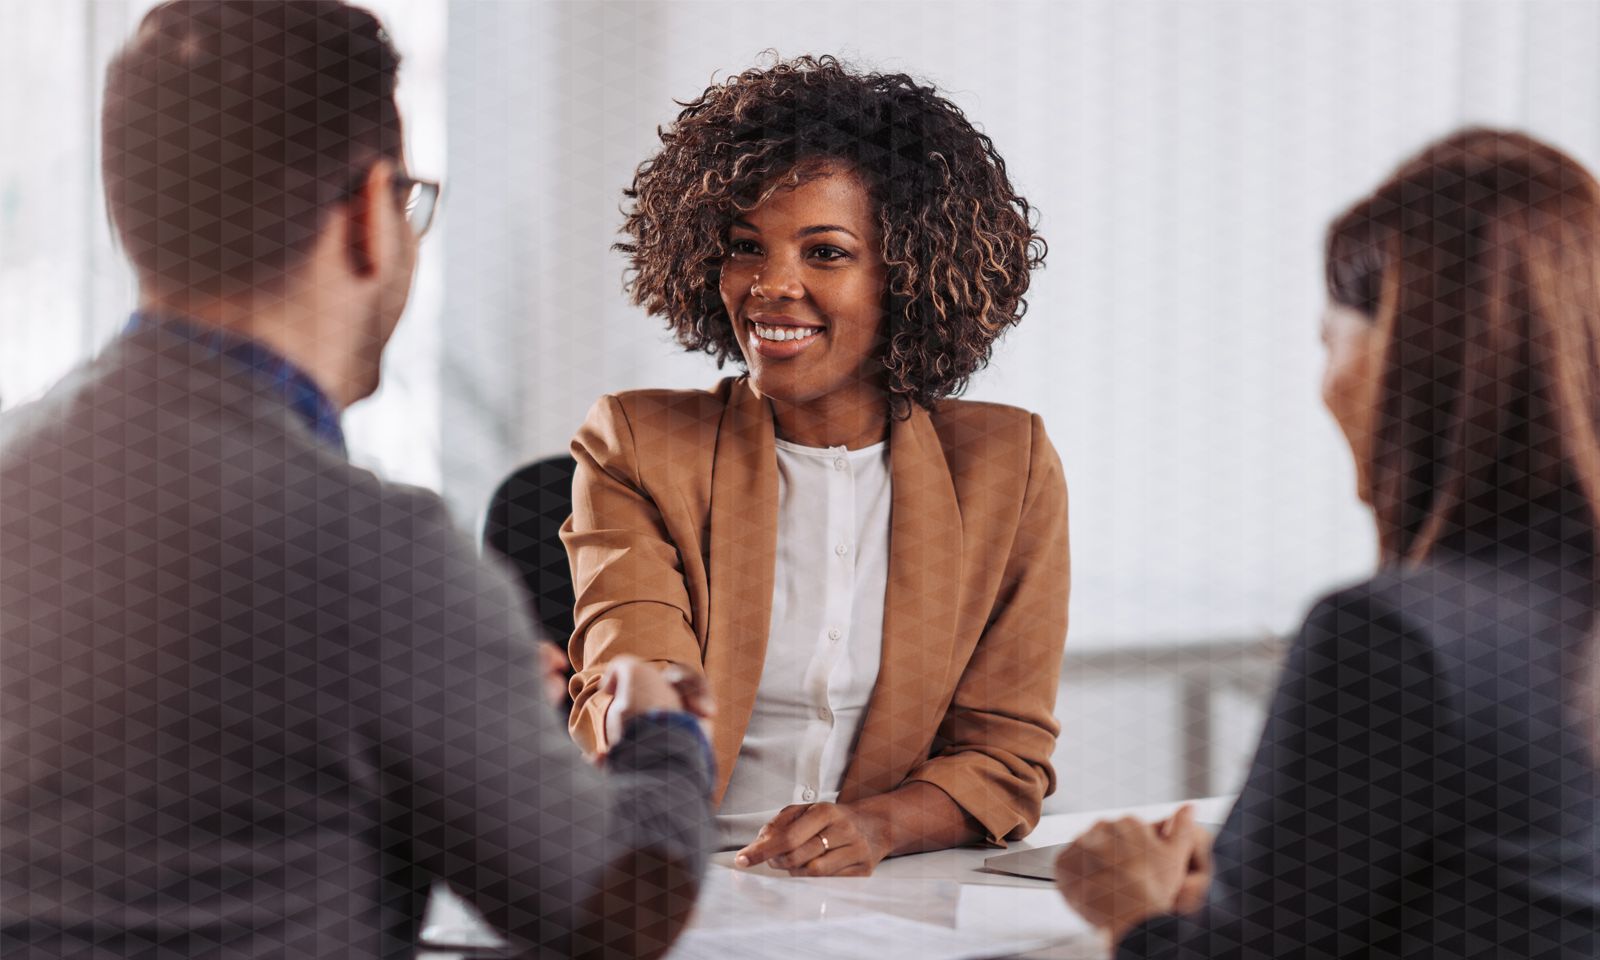 Is Your Interview Process Working? Ask These 6 Questions to Find Out